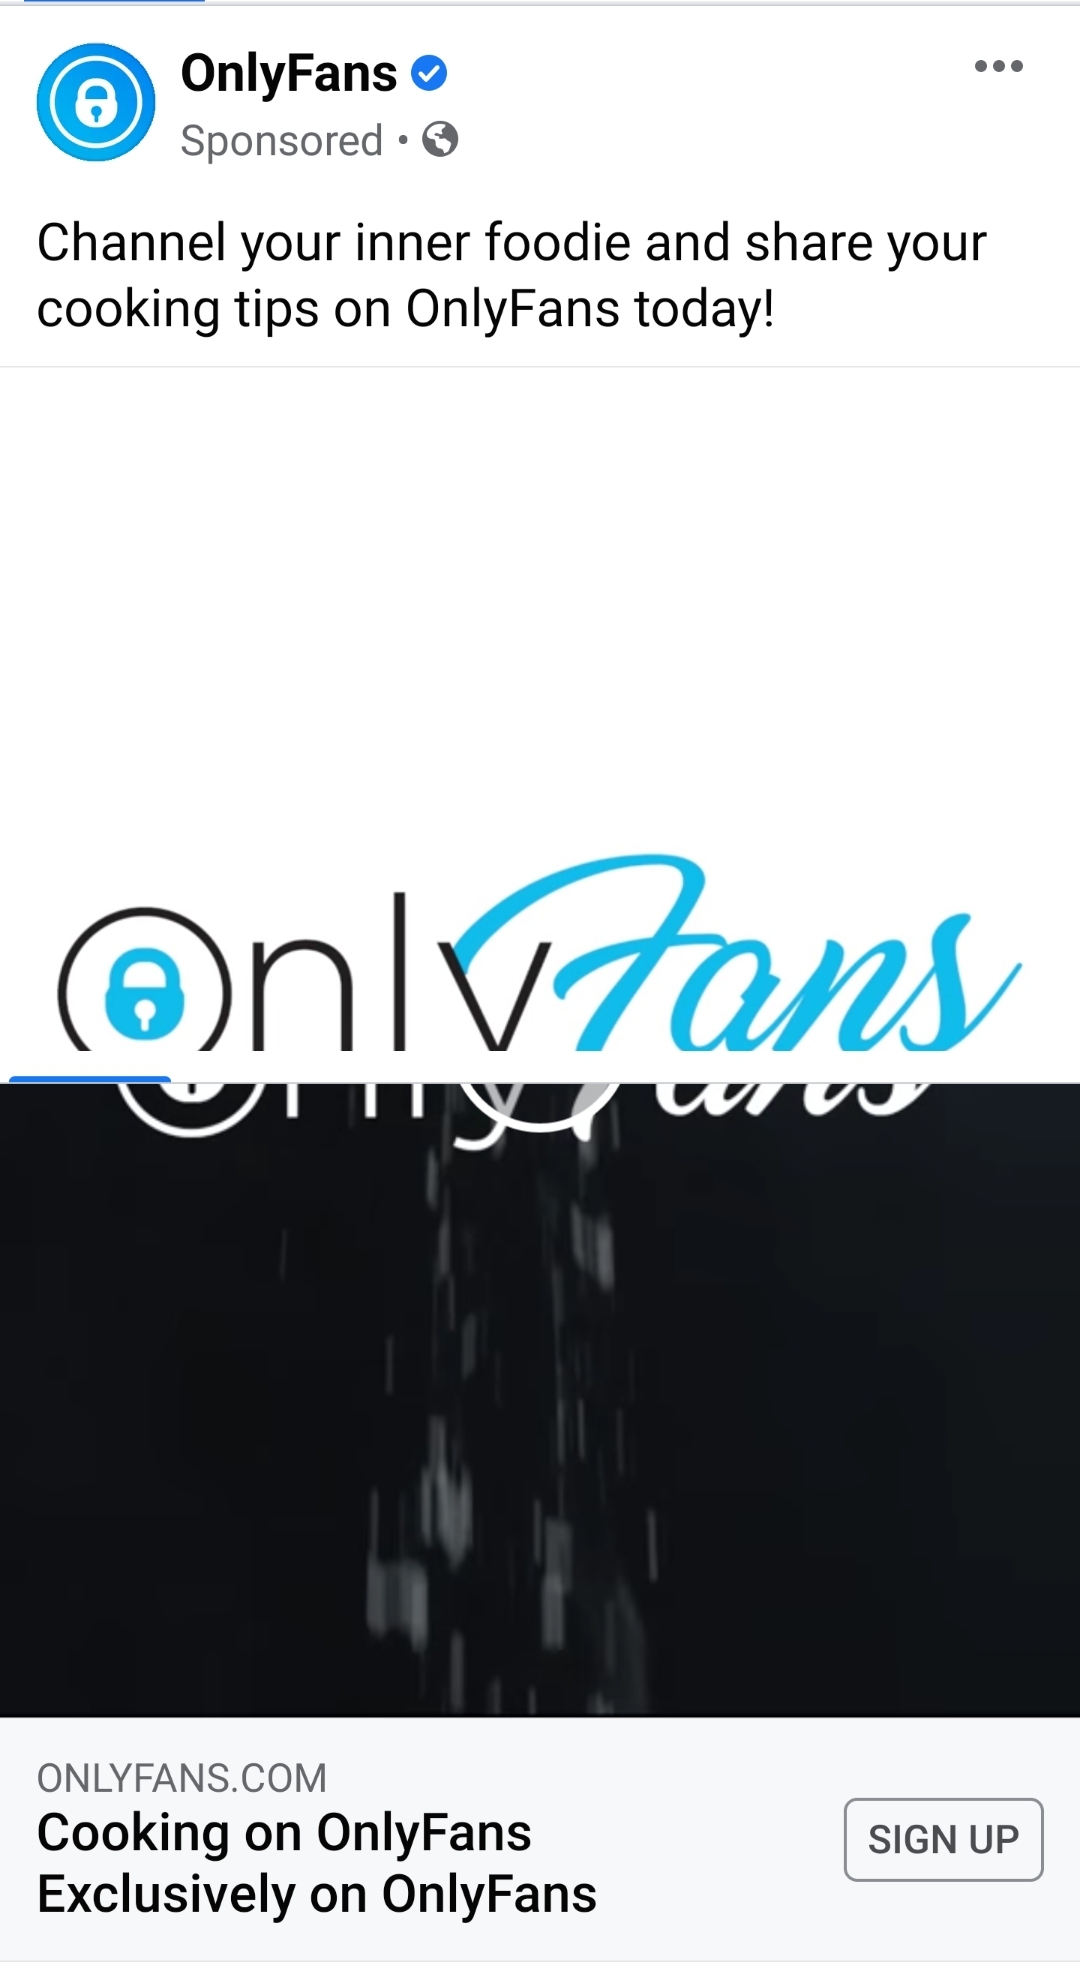 Onlyfans logo template